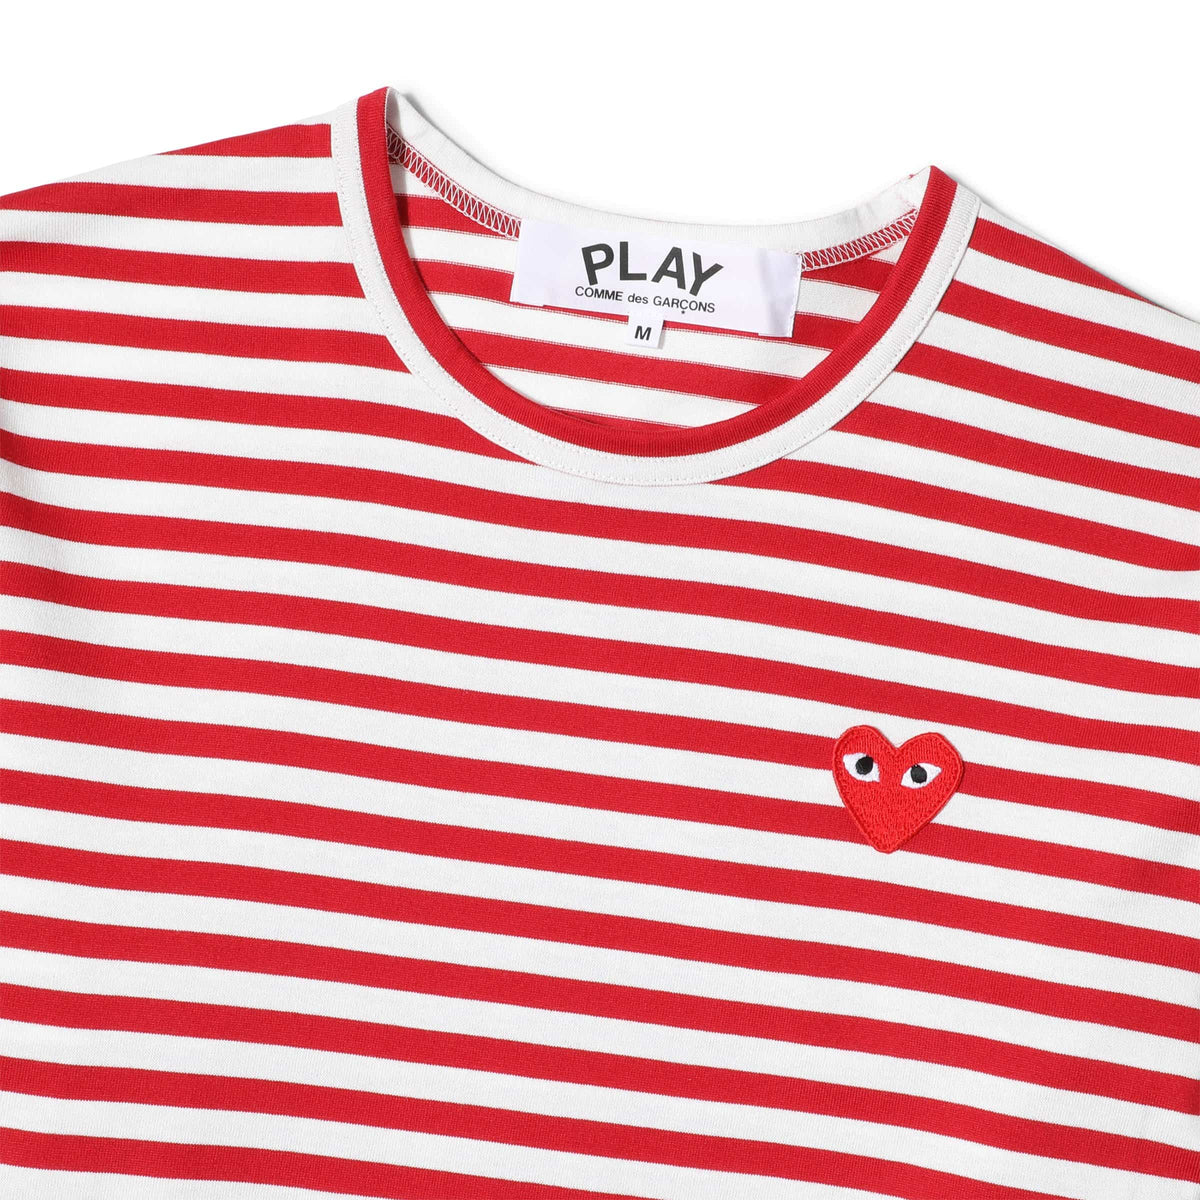 comme des garcons red striped shirt